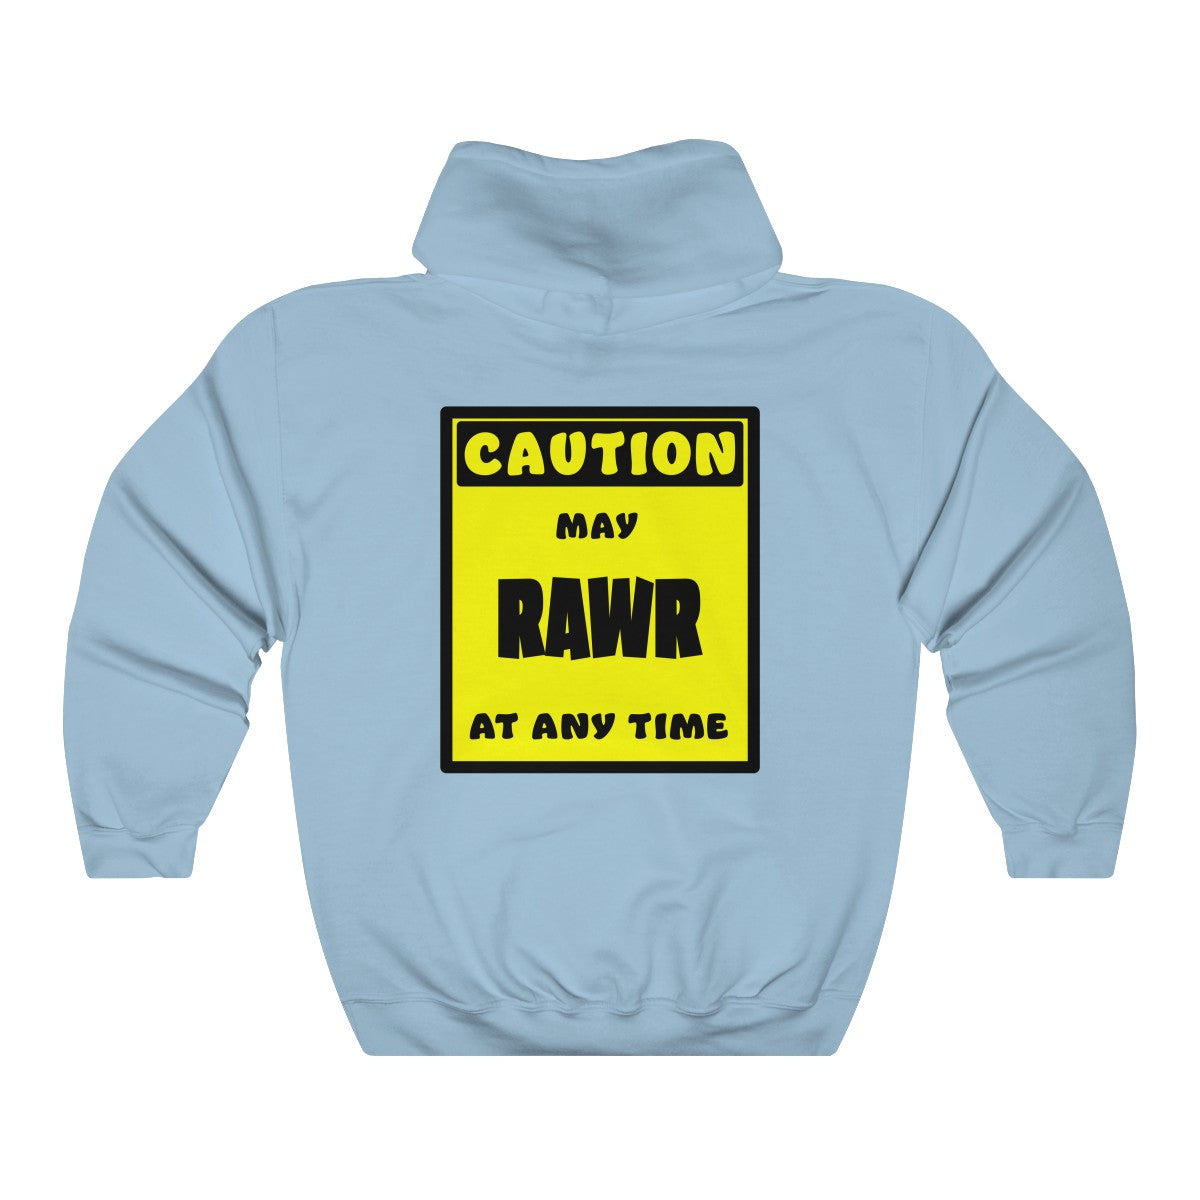 CAUTION! May RAWR at any time! - Hoodie Hoodie AFLT-Whootorca Light Blue S 